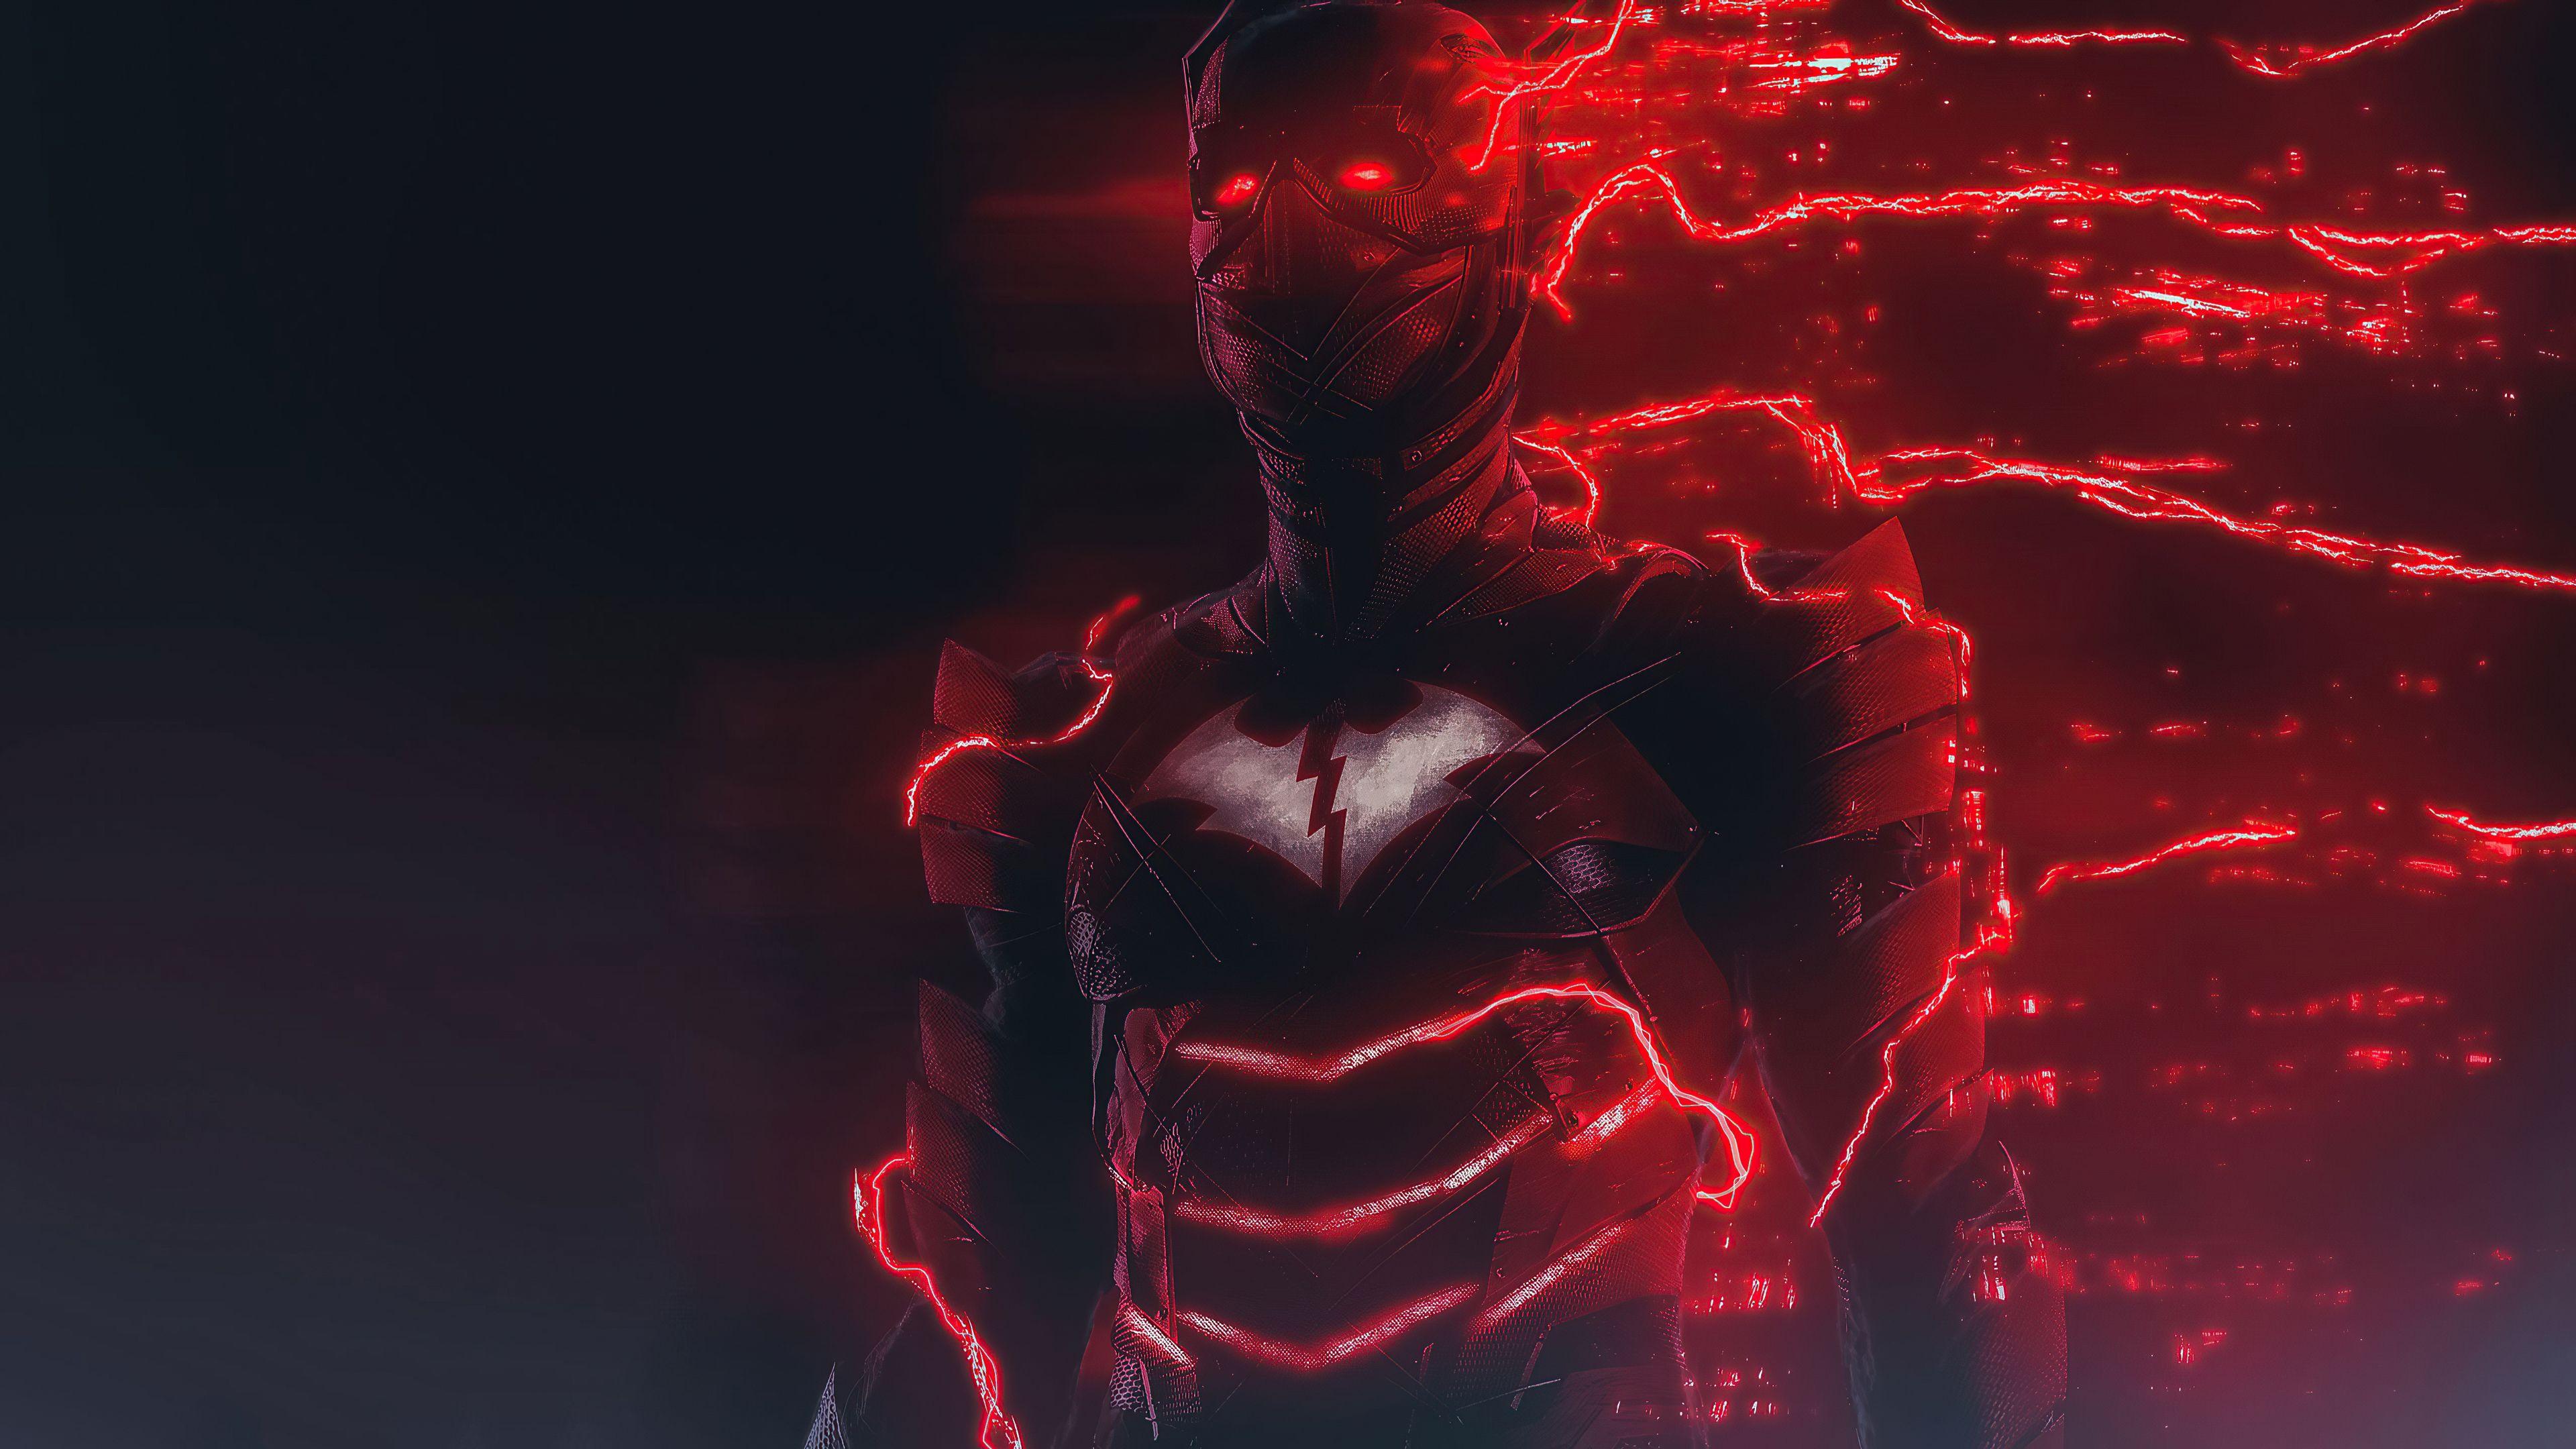 Red Death Bruce Wayne and Reverse Death Barry Allen Wallpaper ID11340